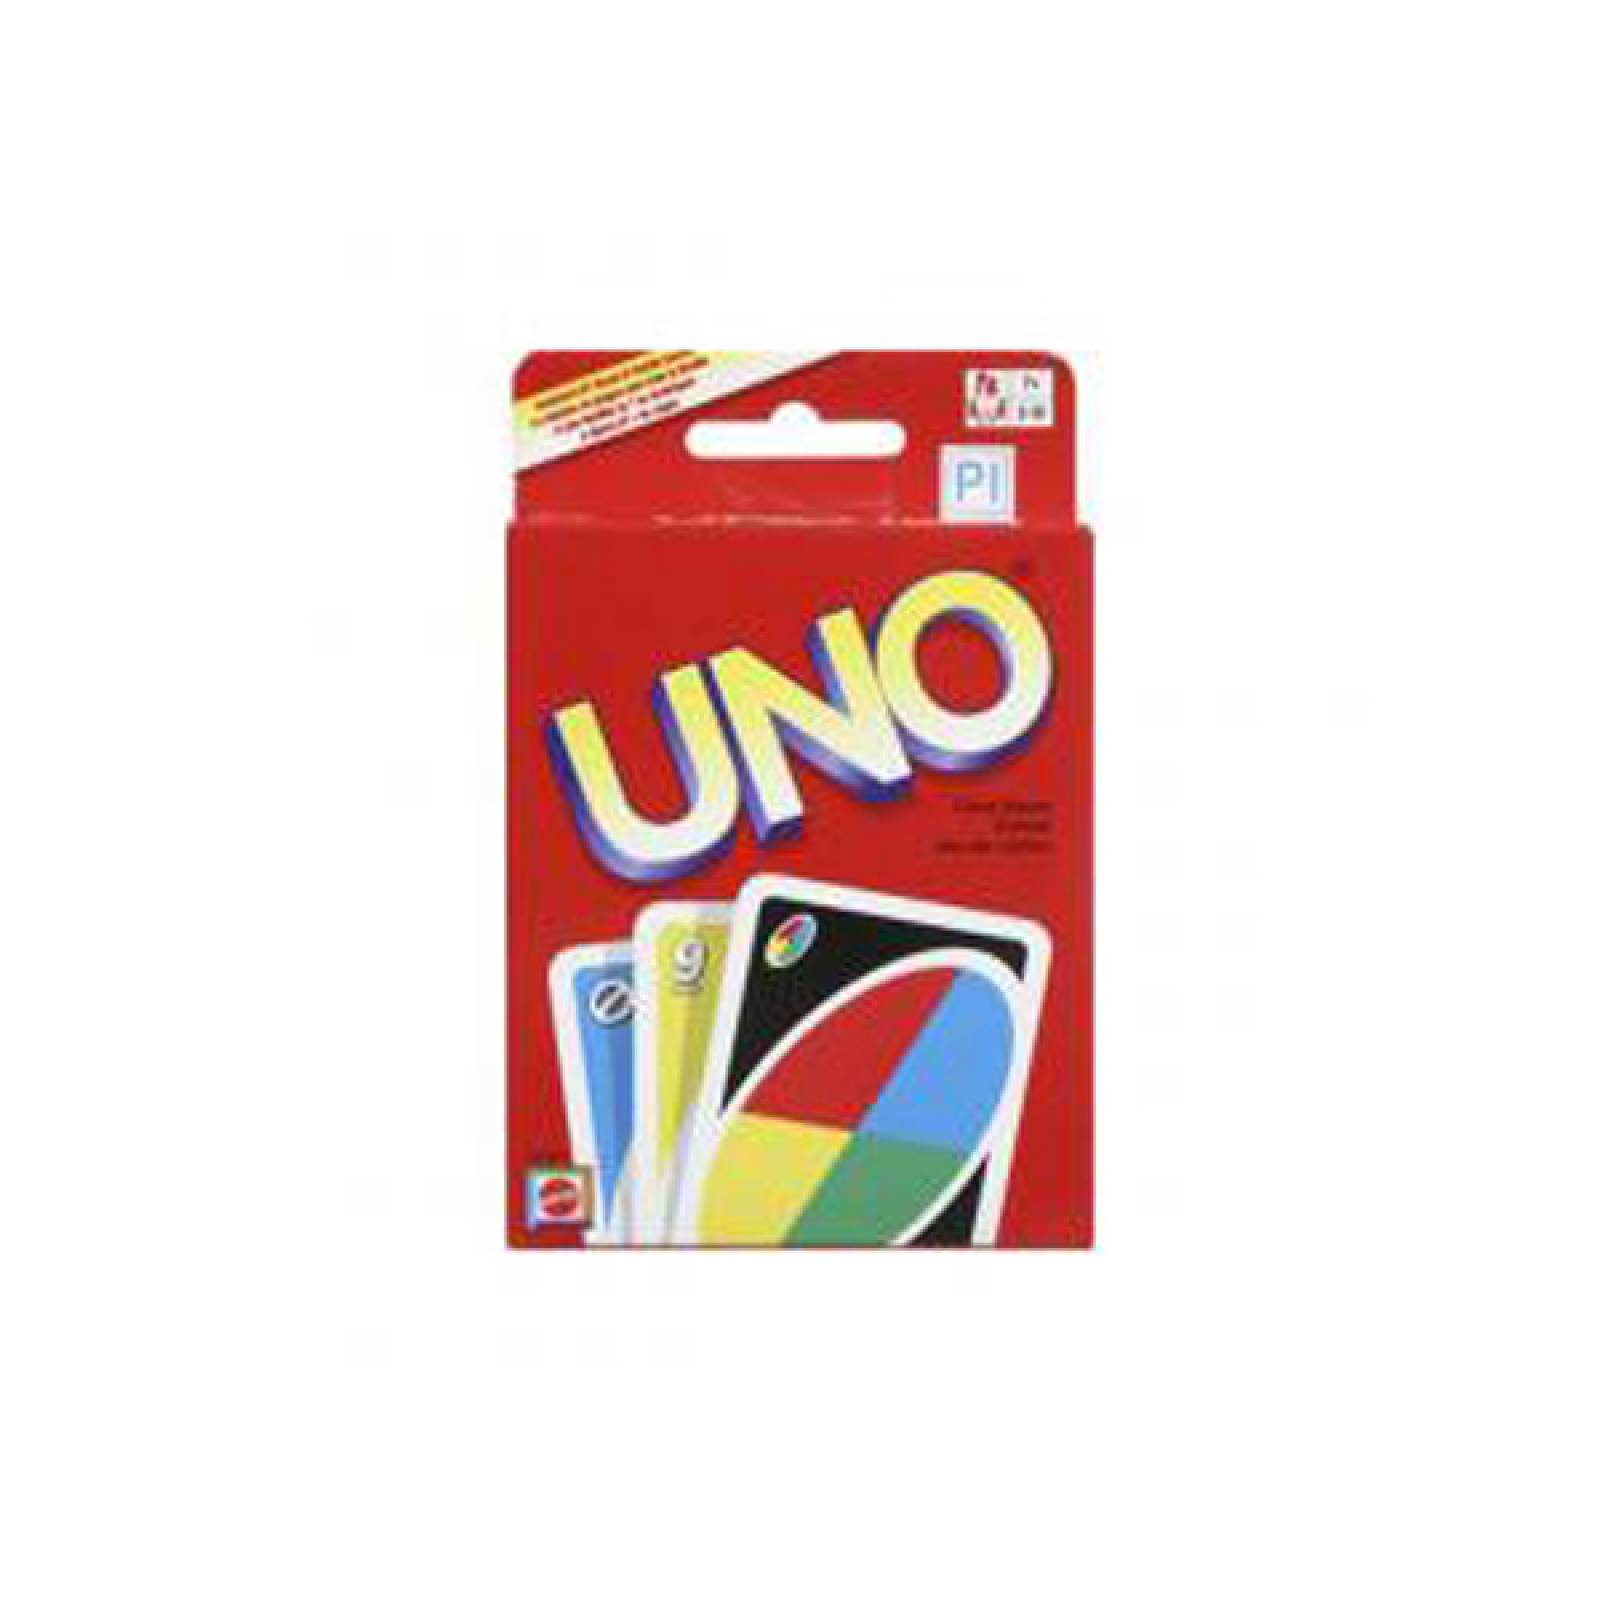 Uno Card Game 7+